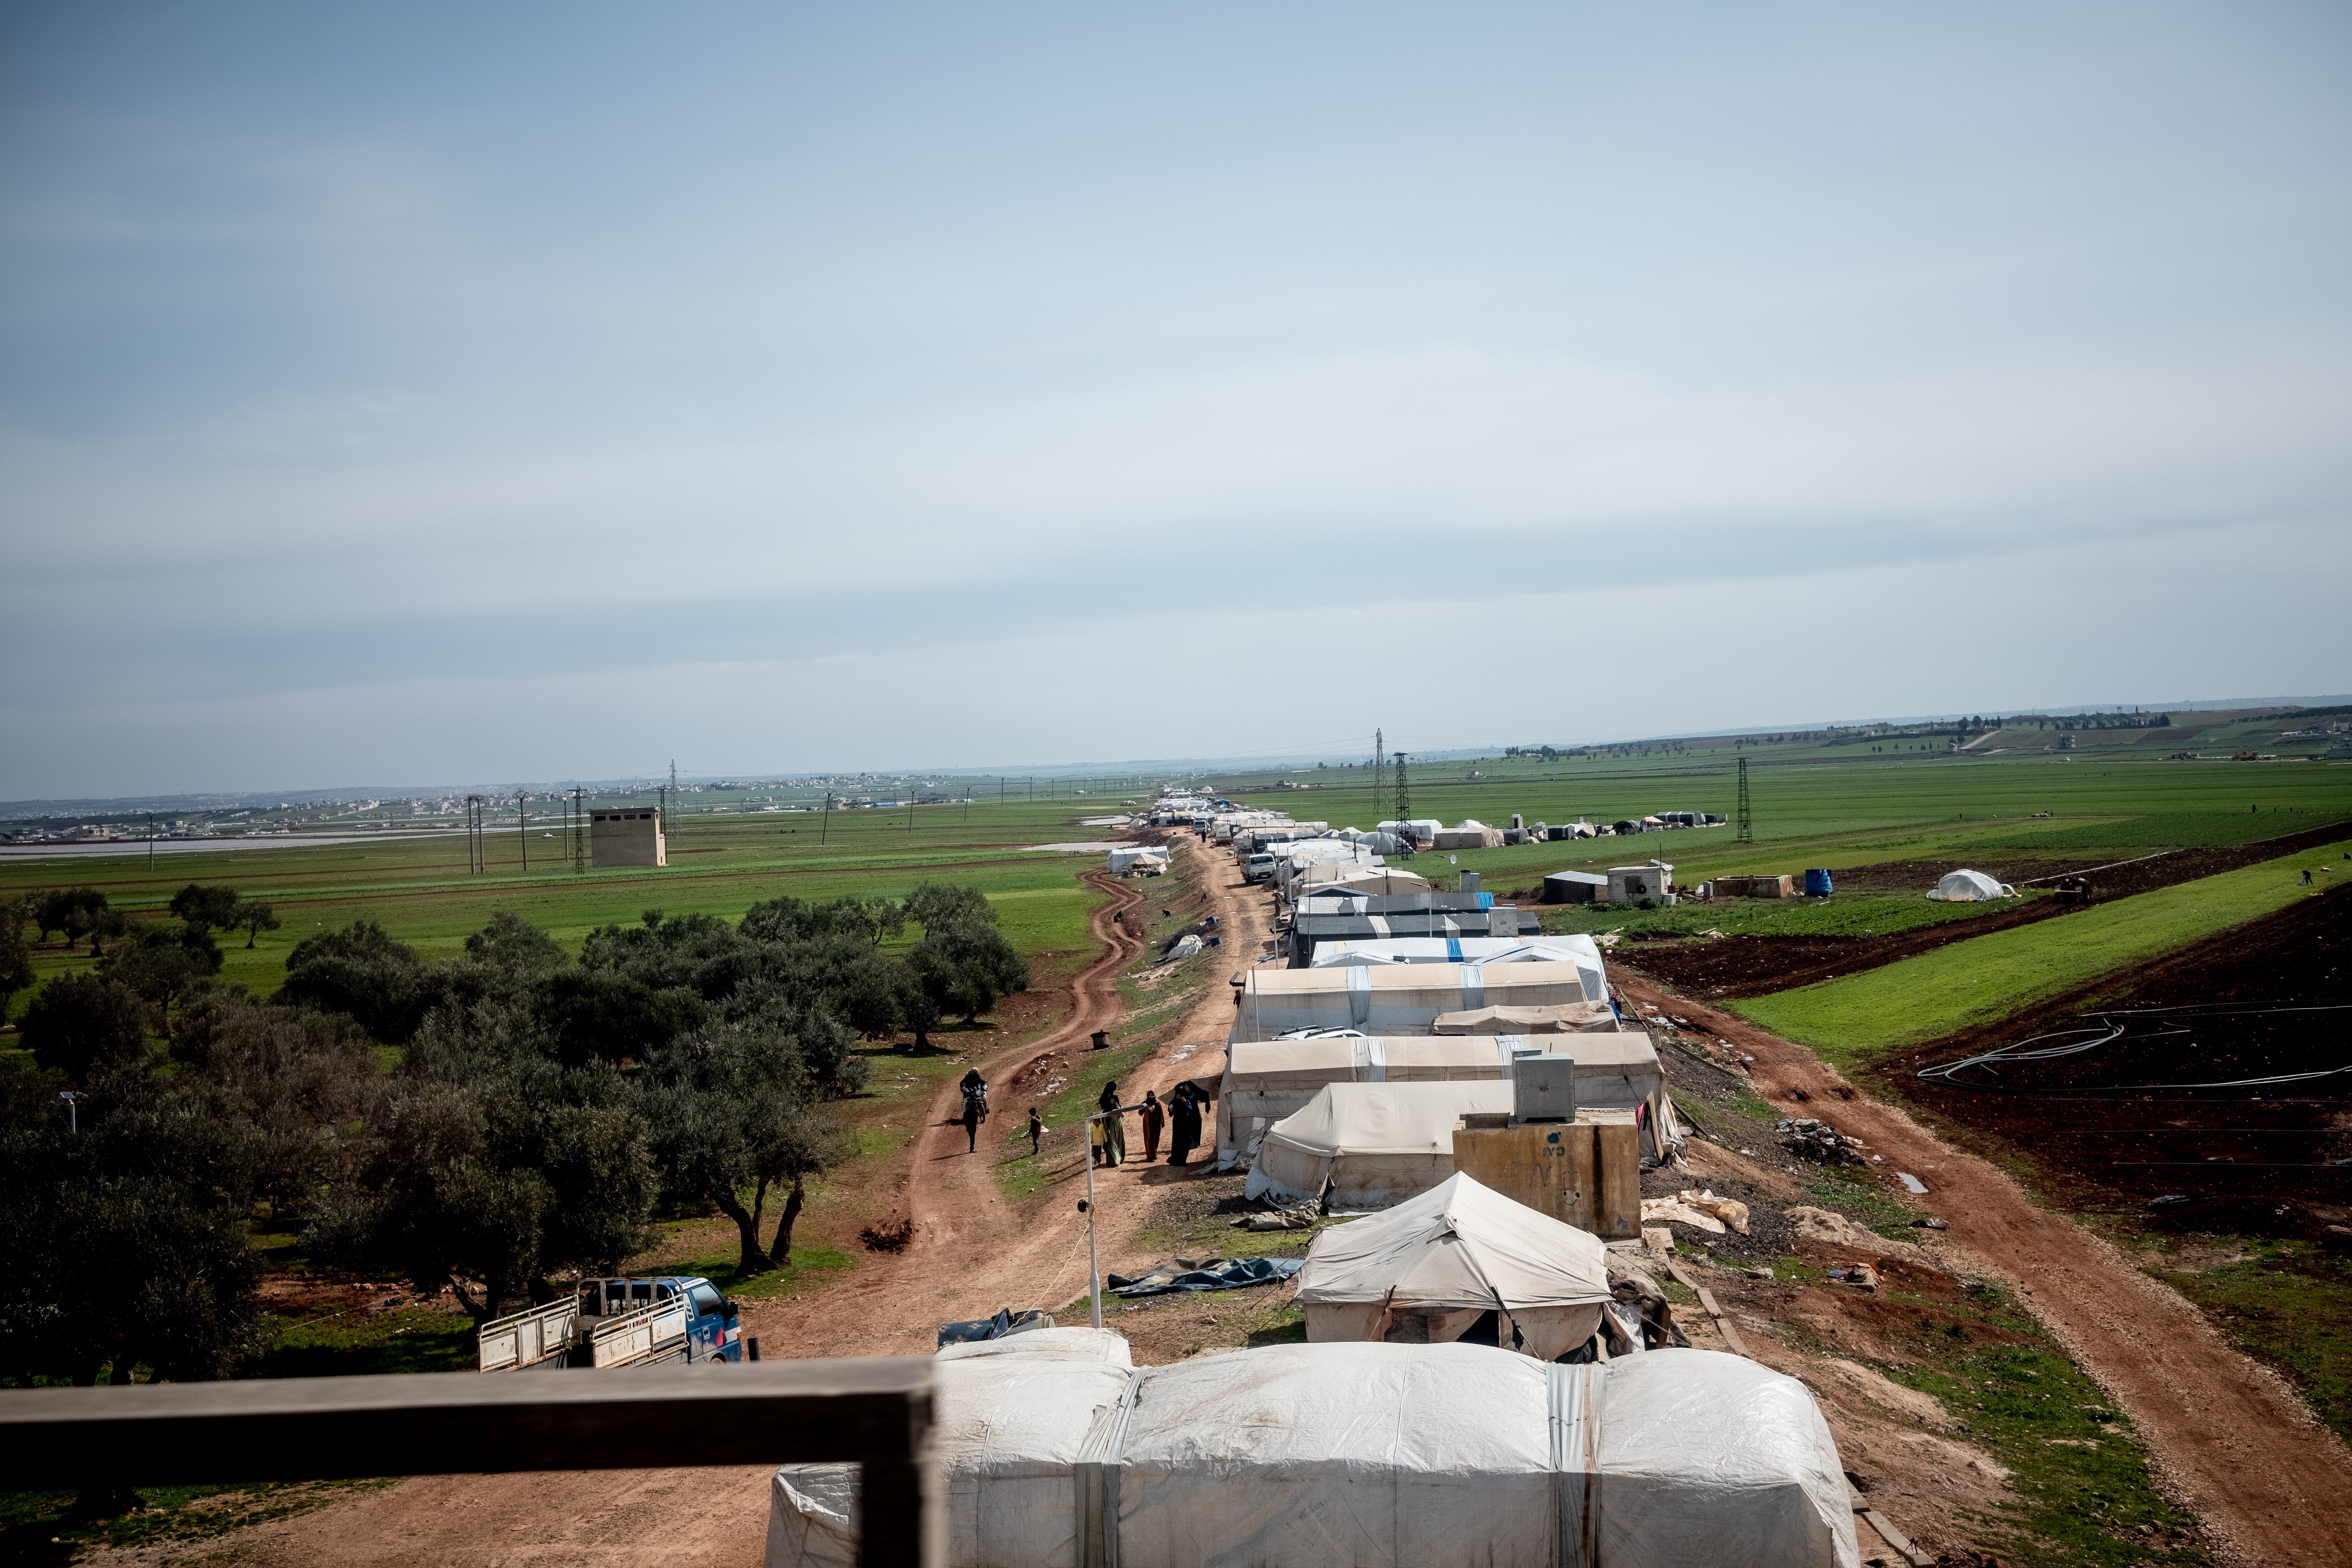 A refugee camp by the main road between the Turkish border and Idlib